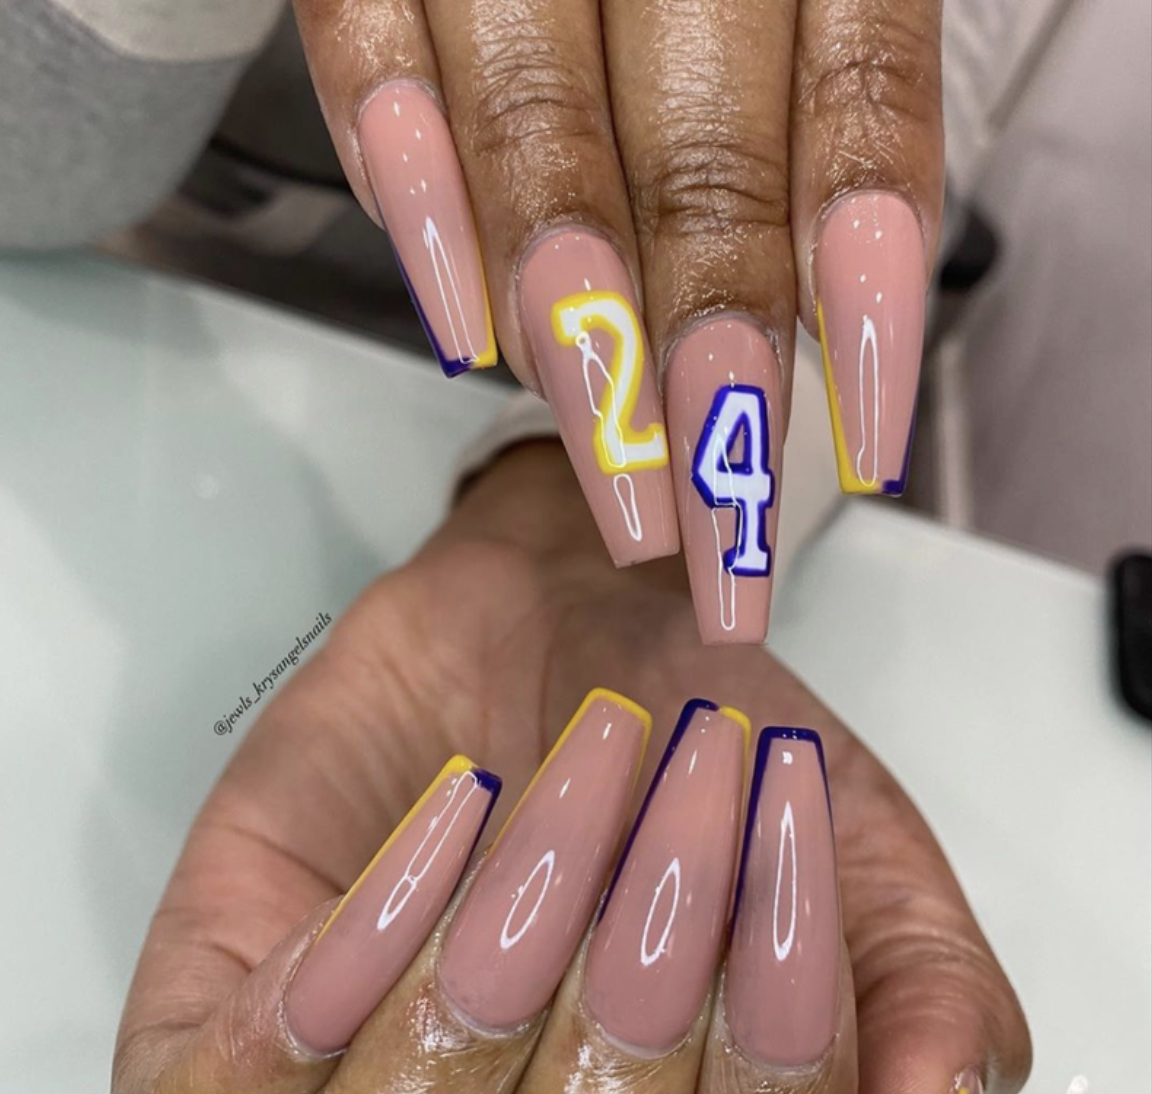 These Nail Designs Are A Touching Tribute To Kobe Bryant